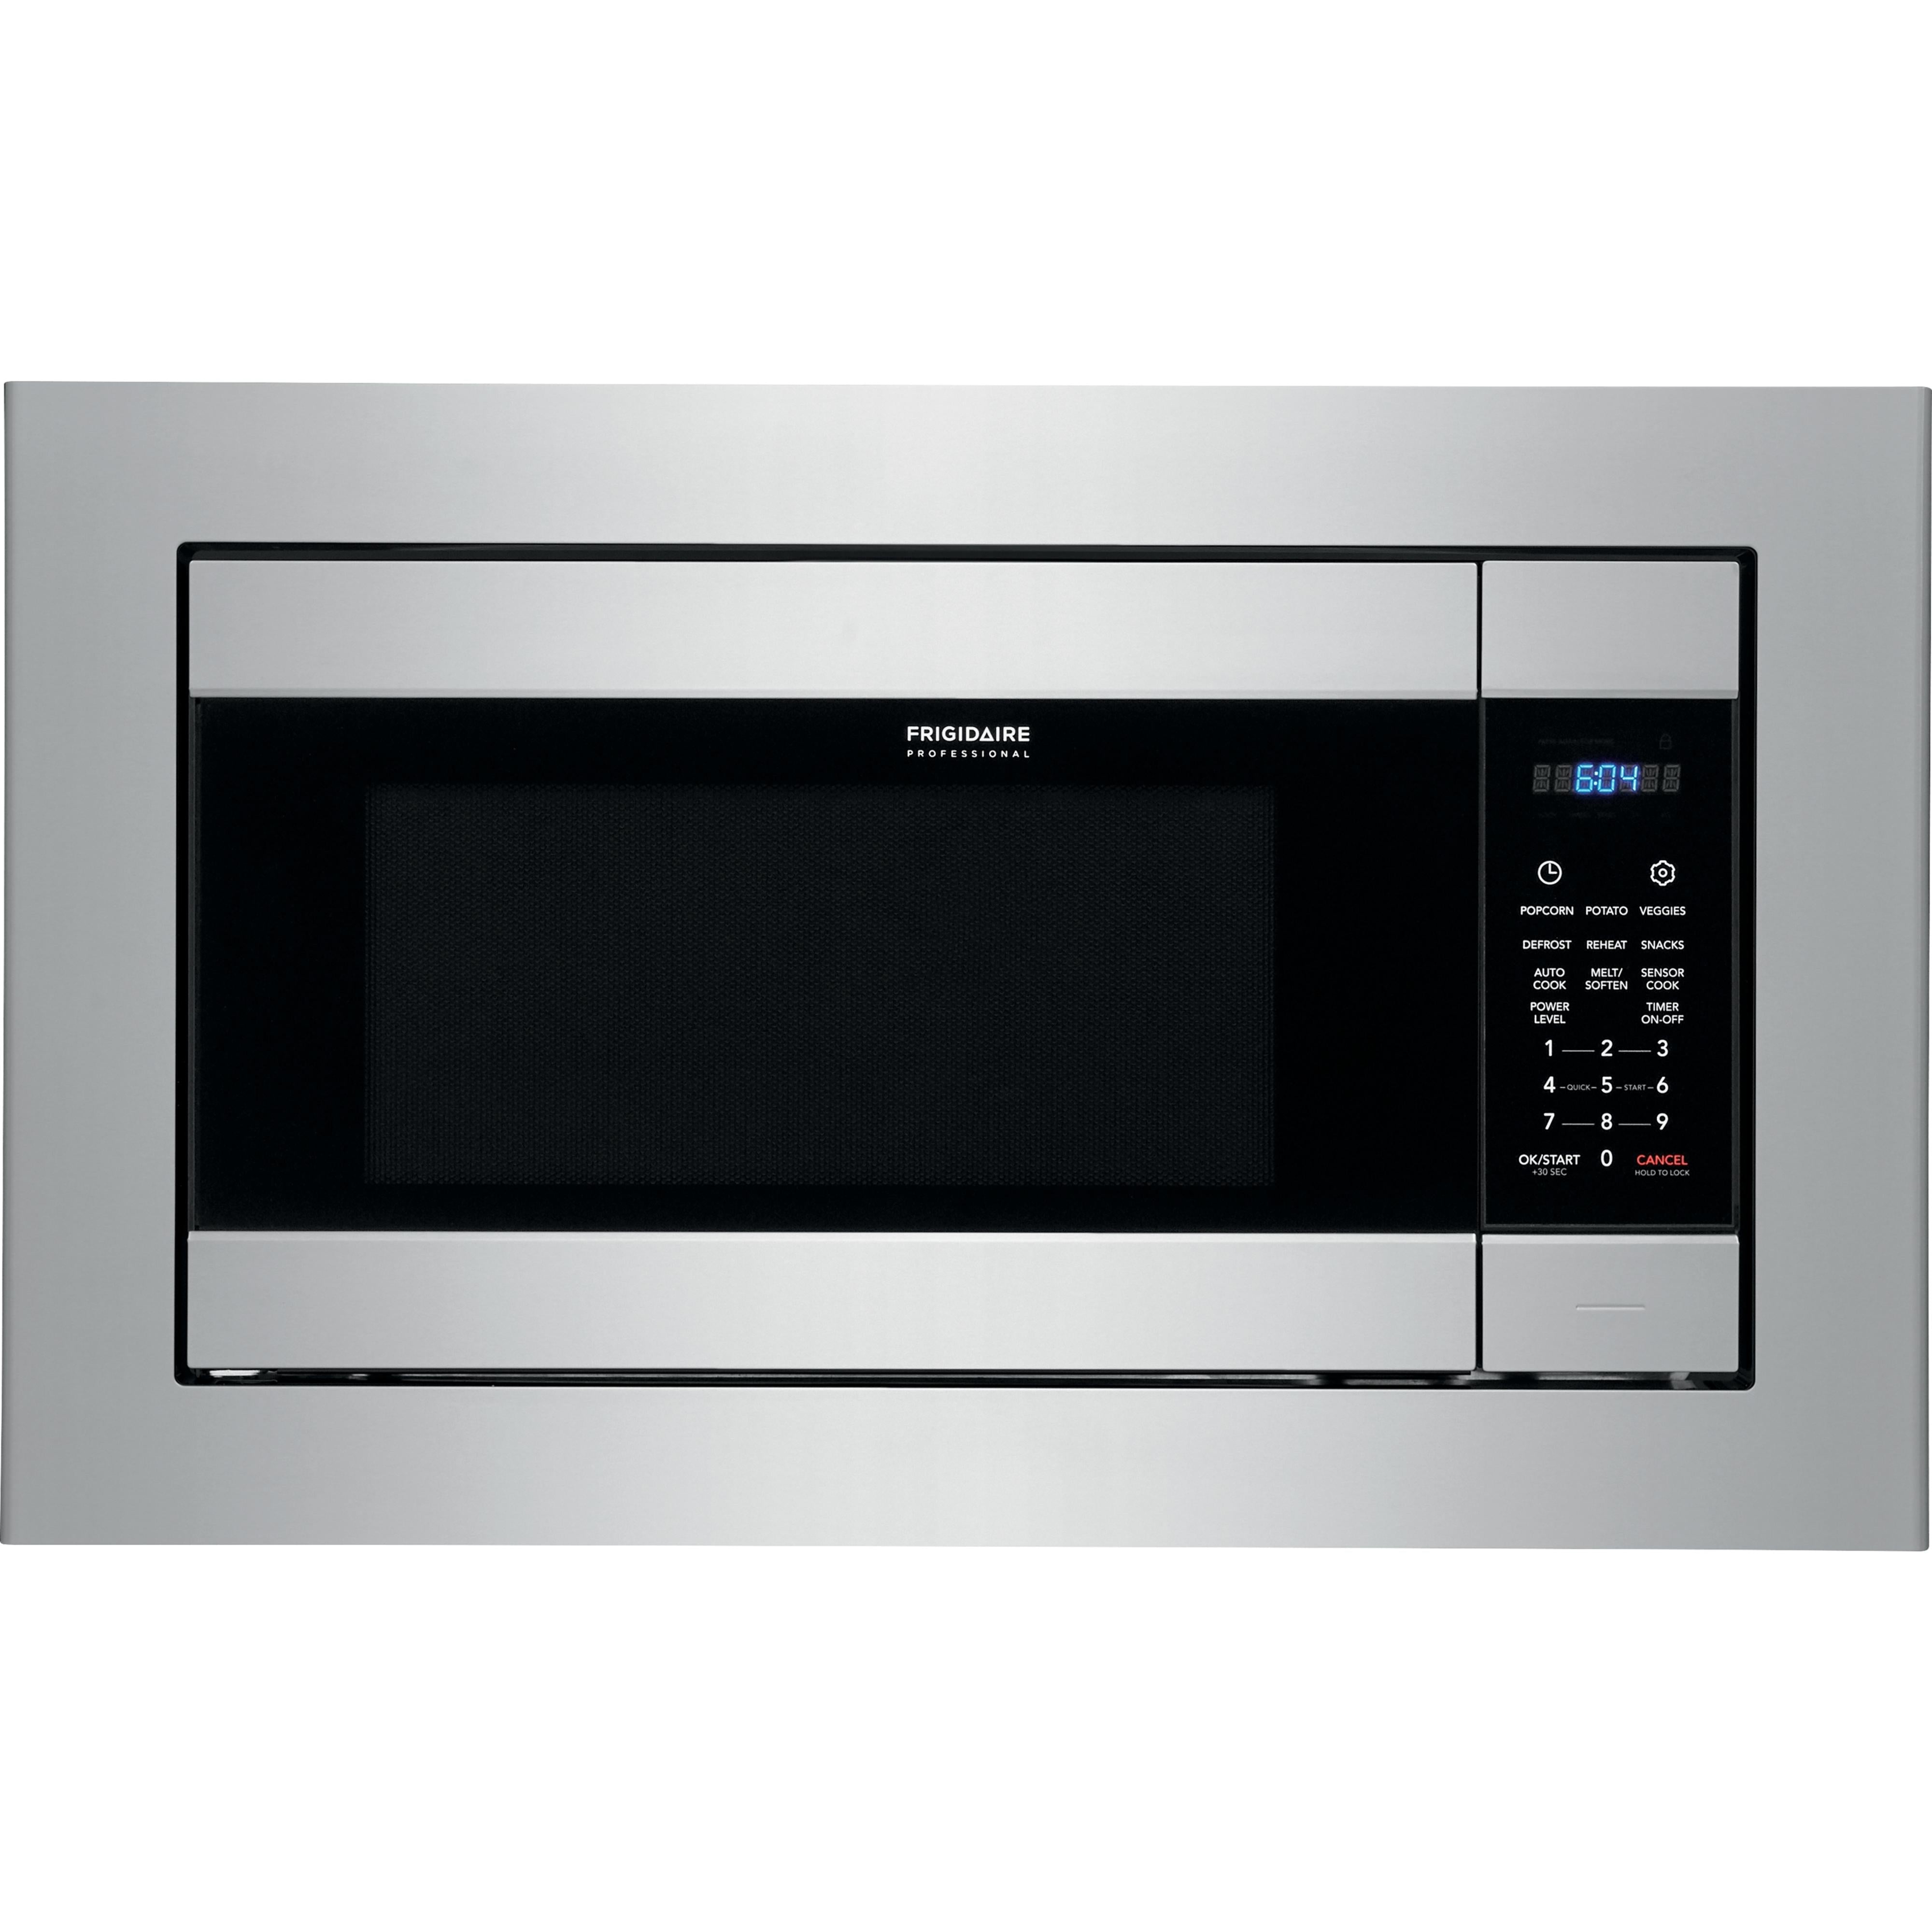 Frigidaire Professional 24-inch, 2.2 cu. ft. Built-In Microwave Oven FPMO227NUF